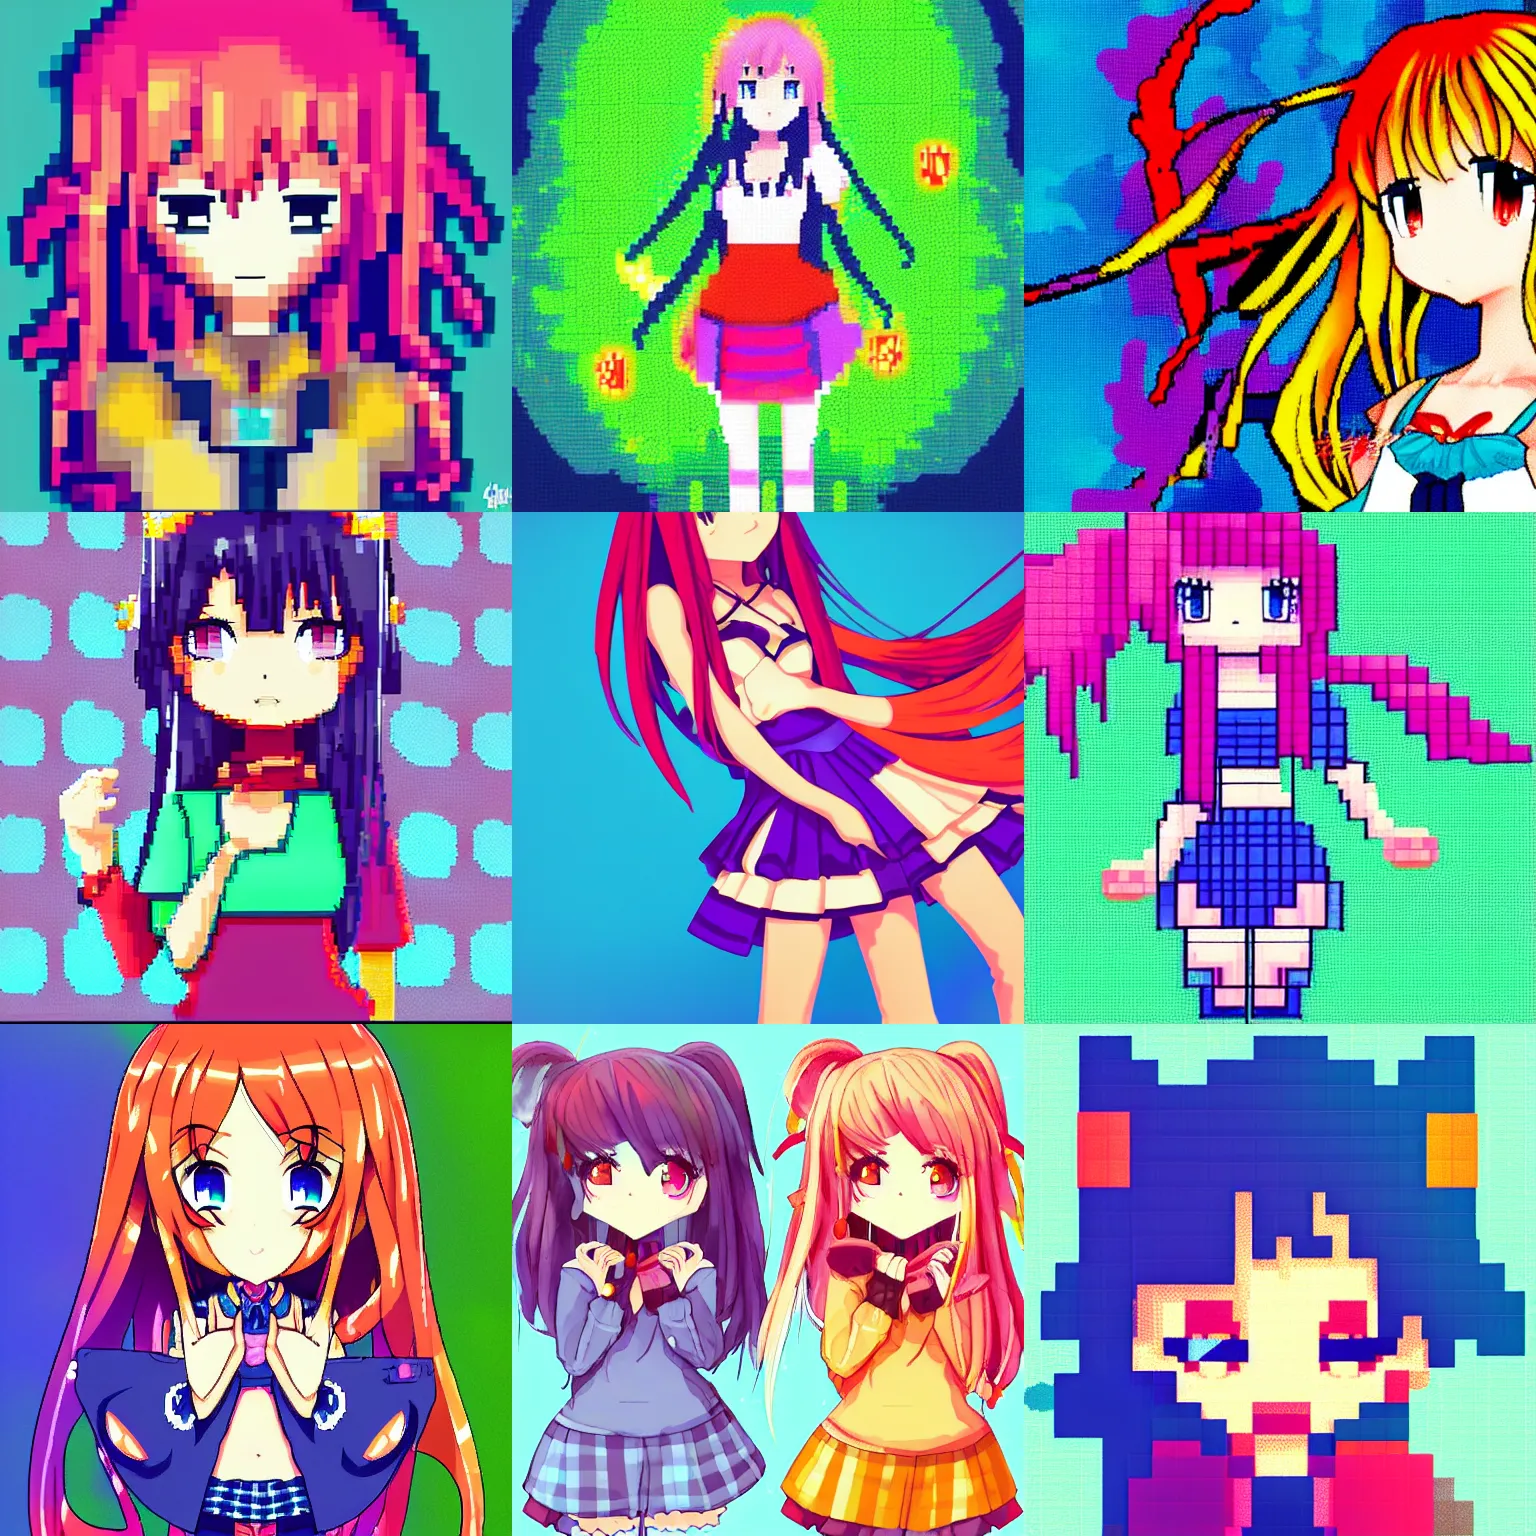 Create anime pixel art sprite for your game by Anandavicky | Fiverr